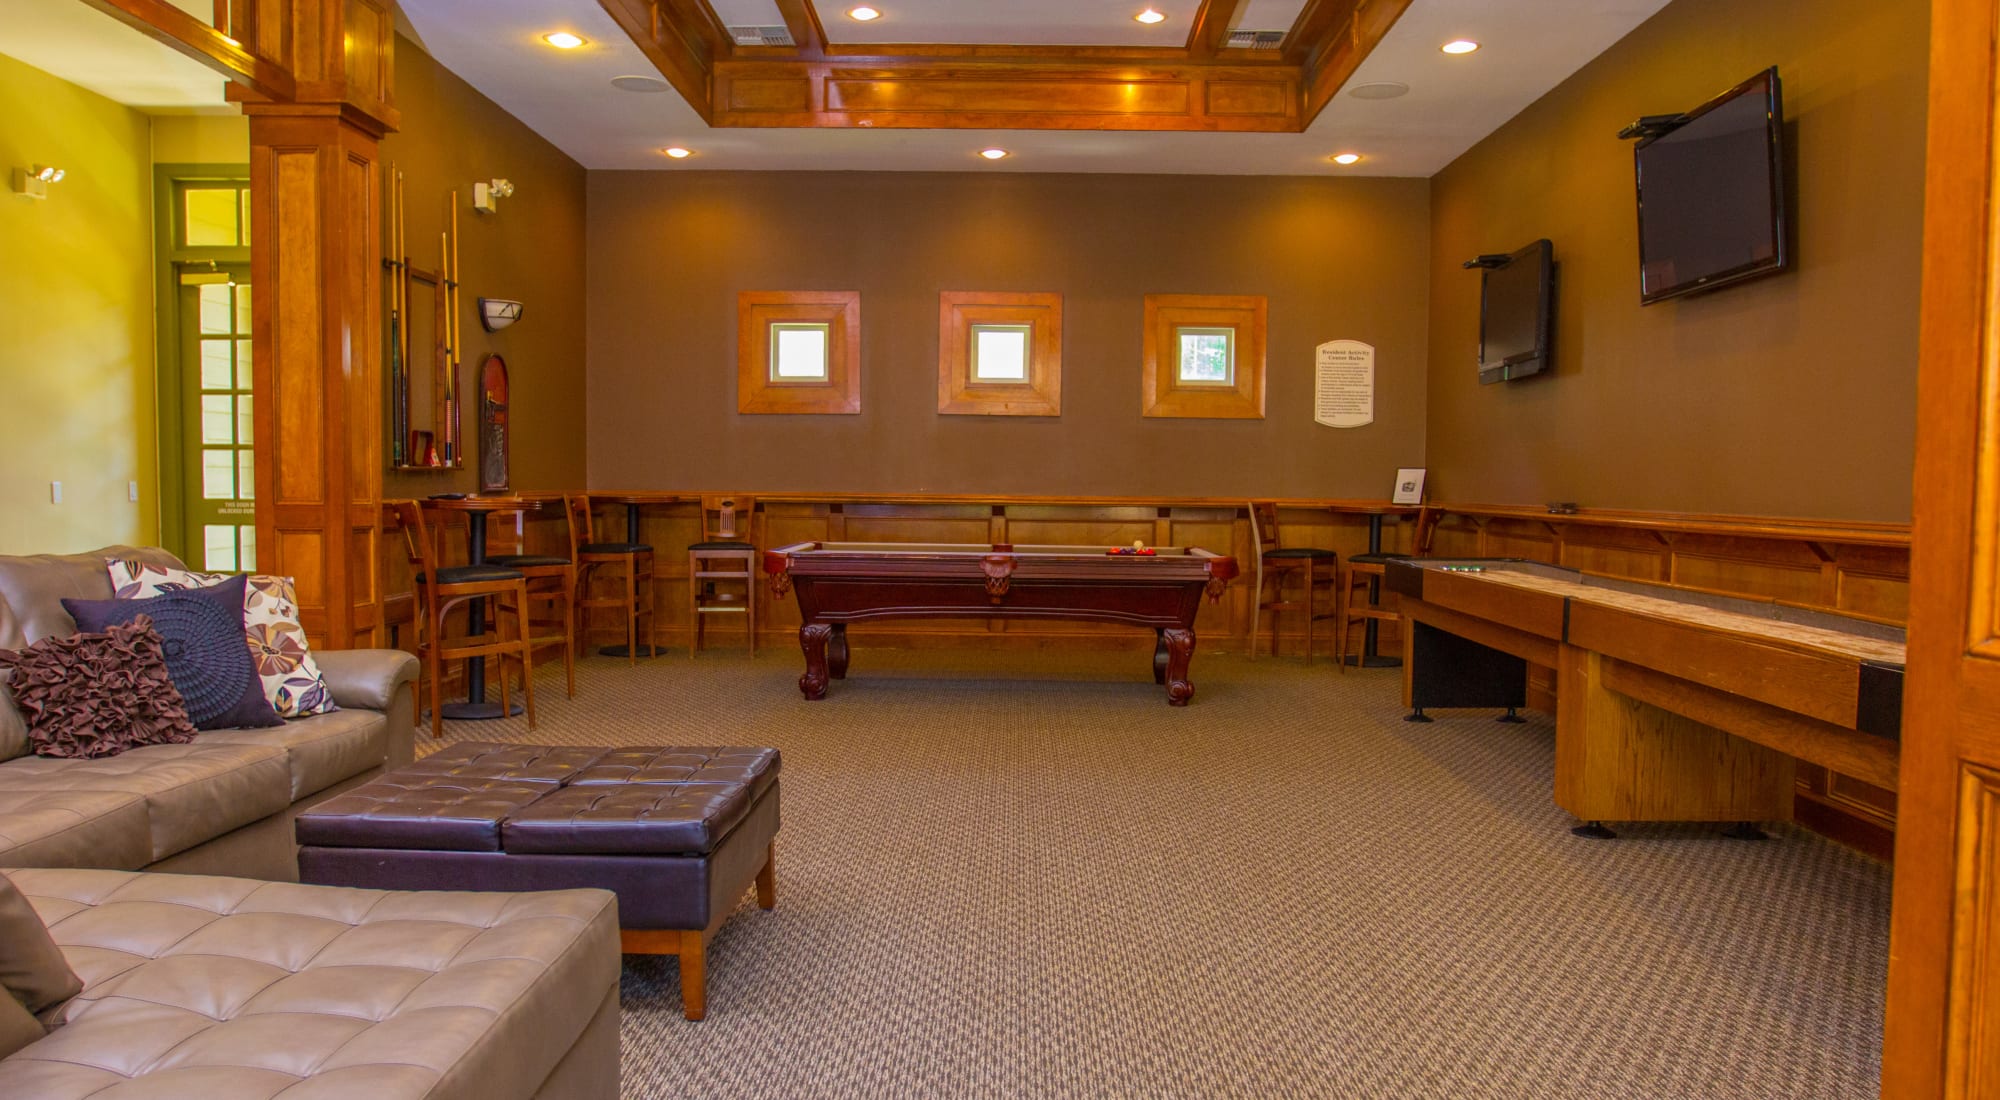 Amenities at The Lodge at River Park in Fort Worth, Texas